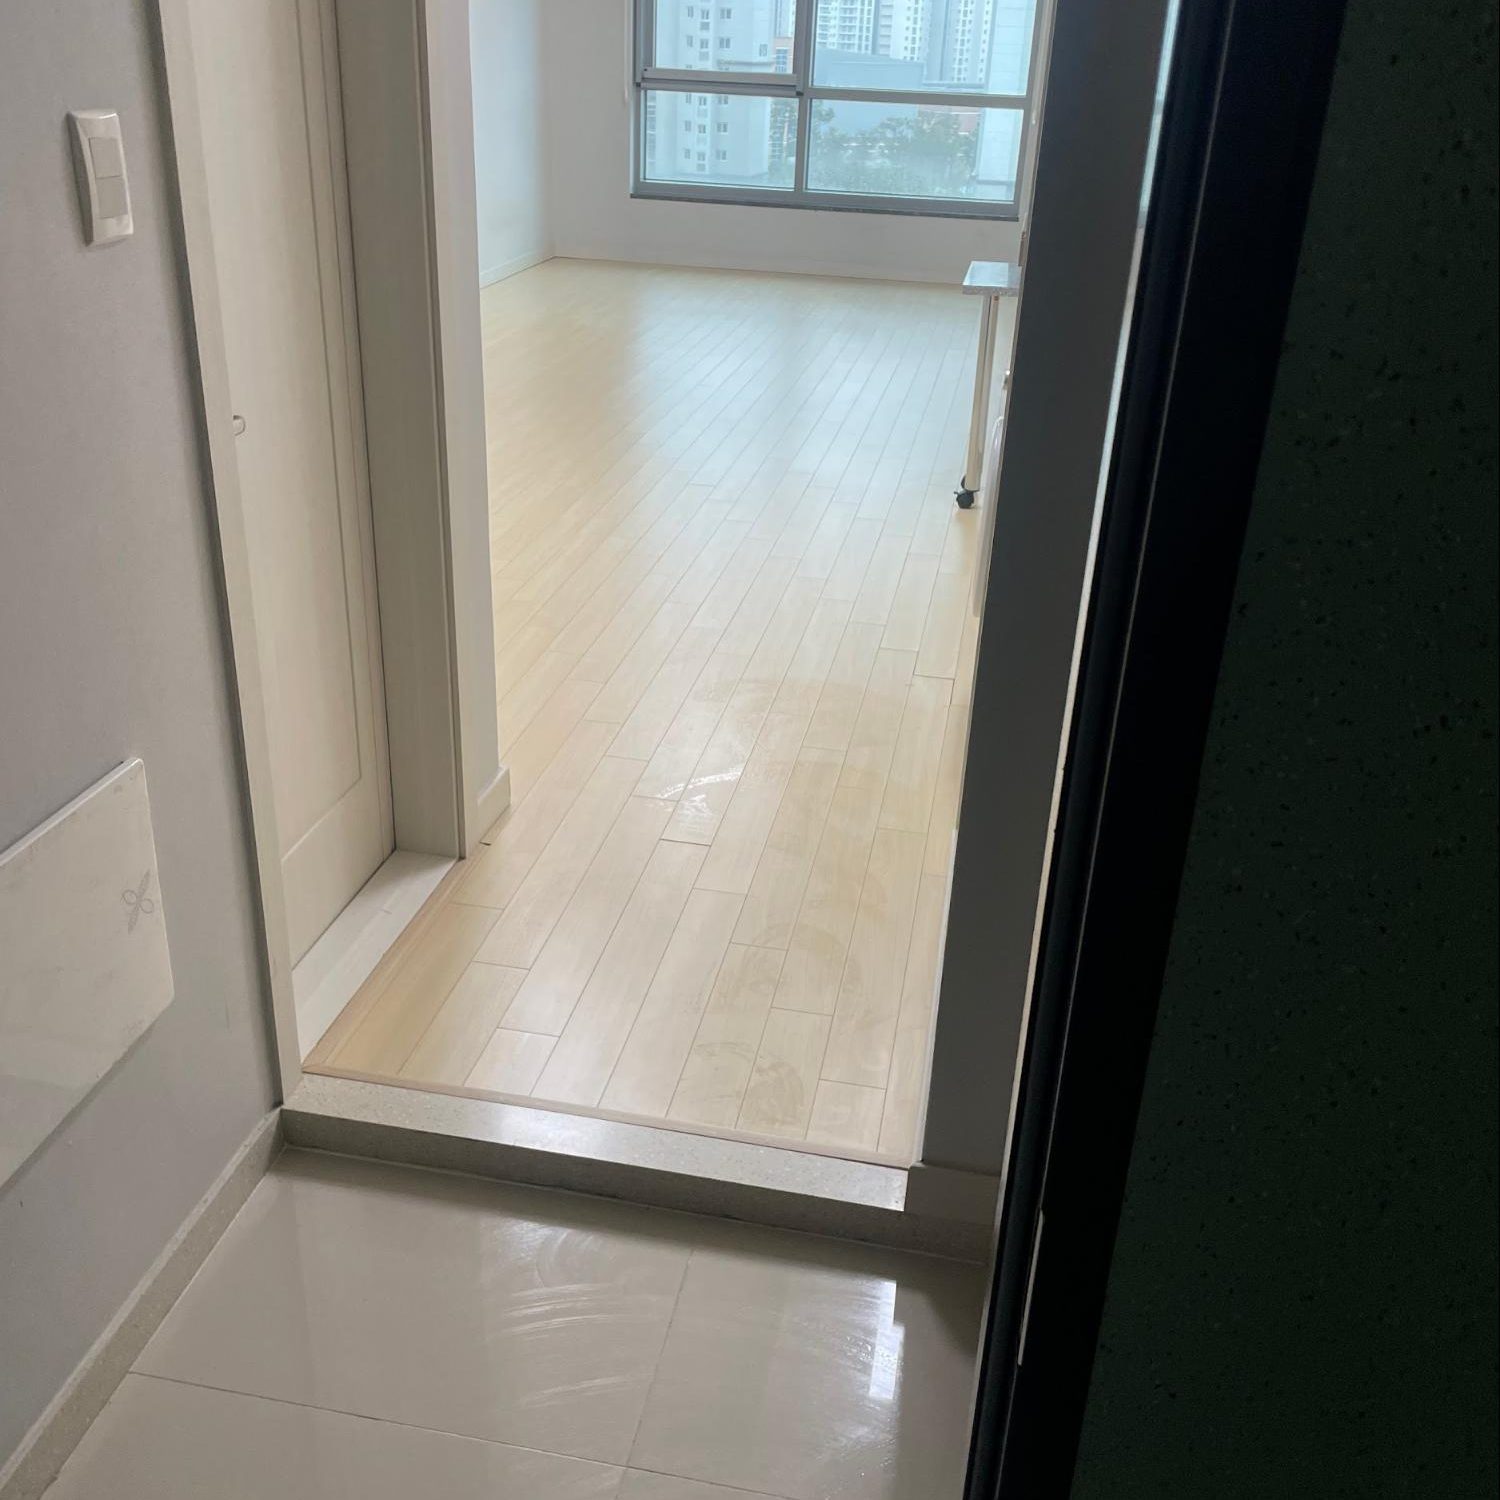 Entry way to an officetel in Korea